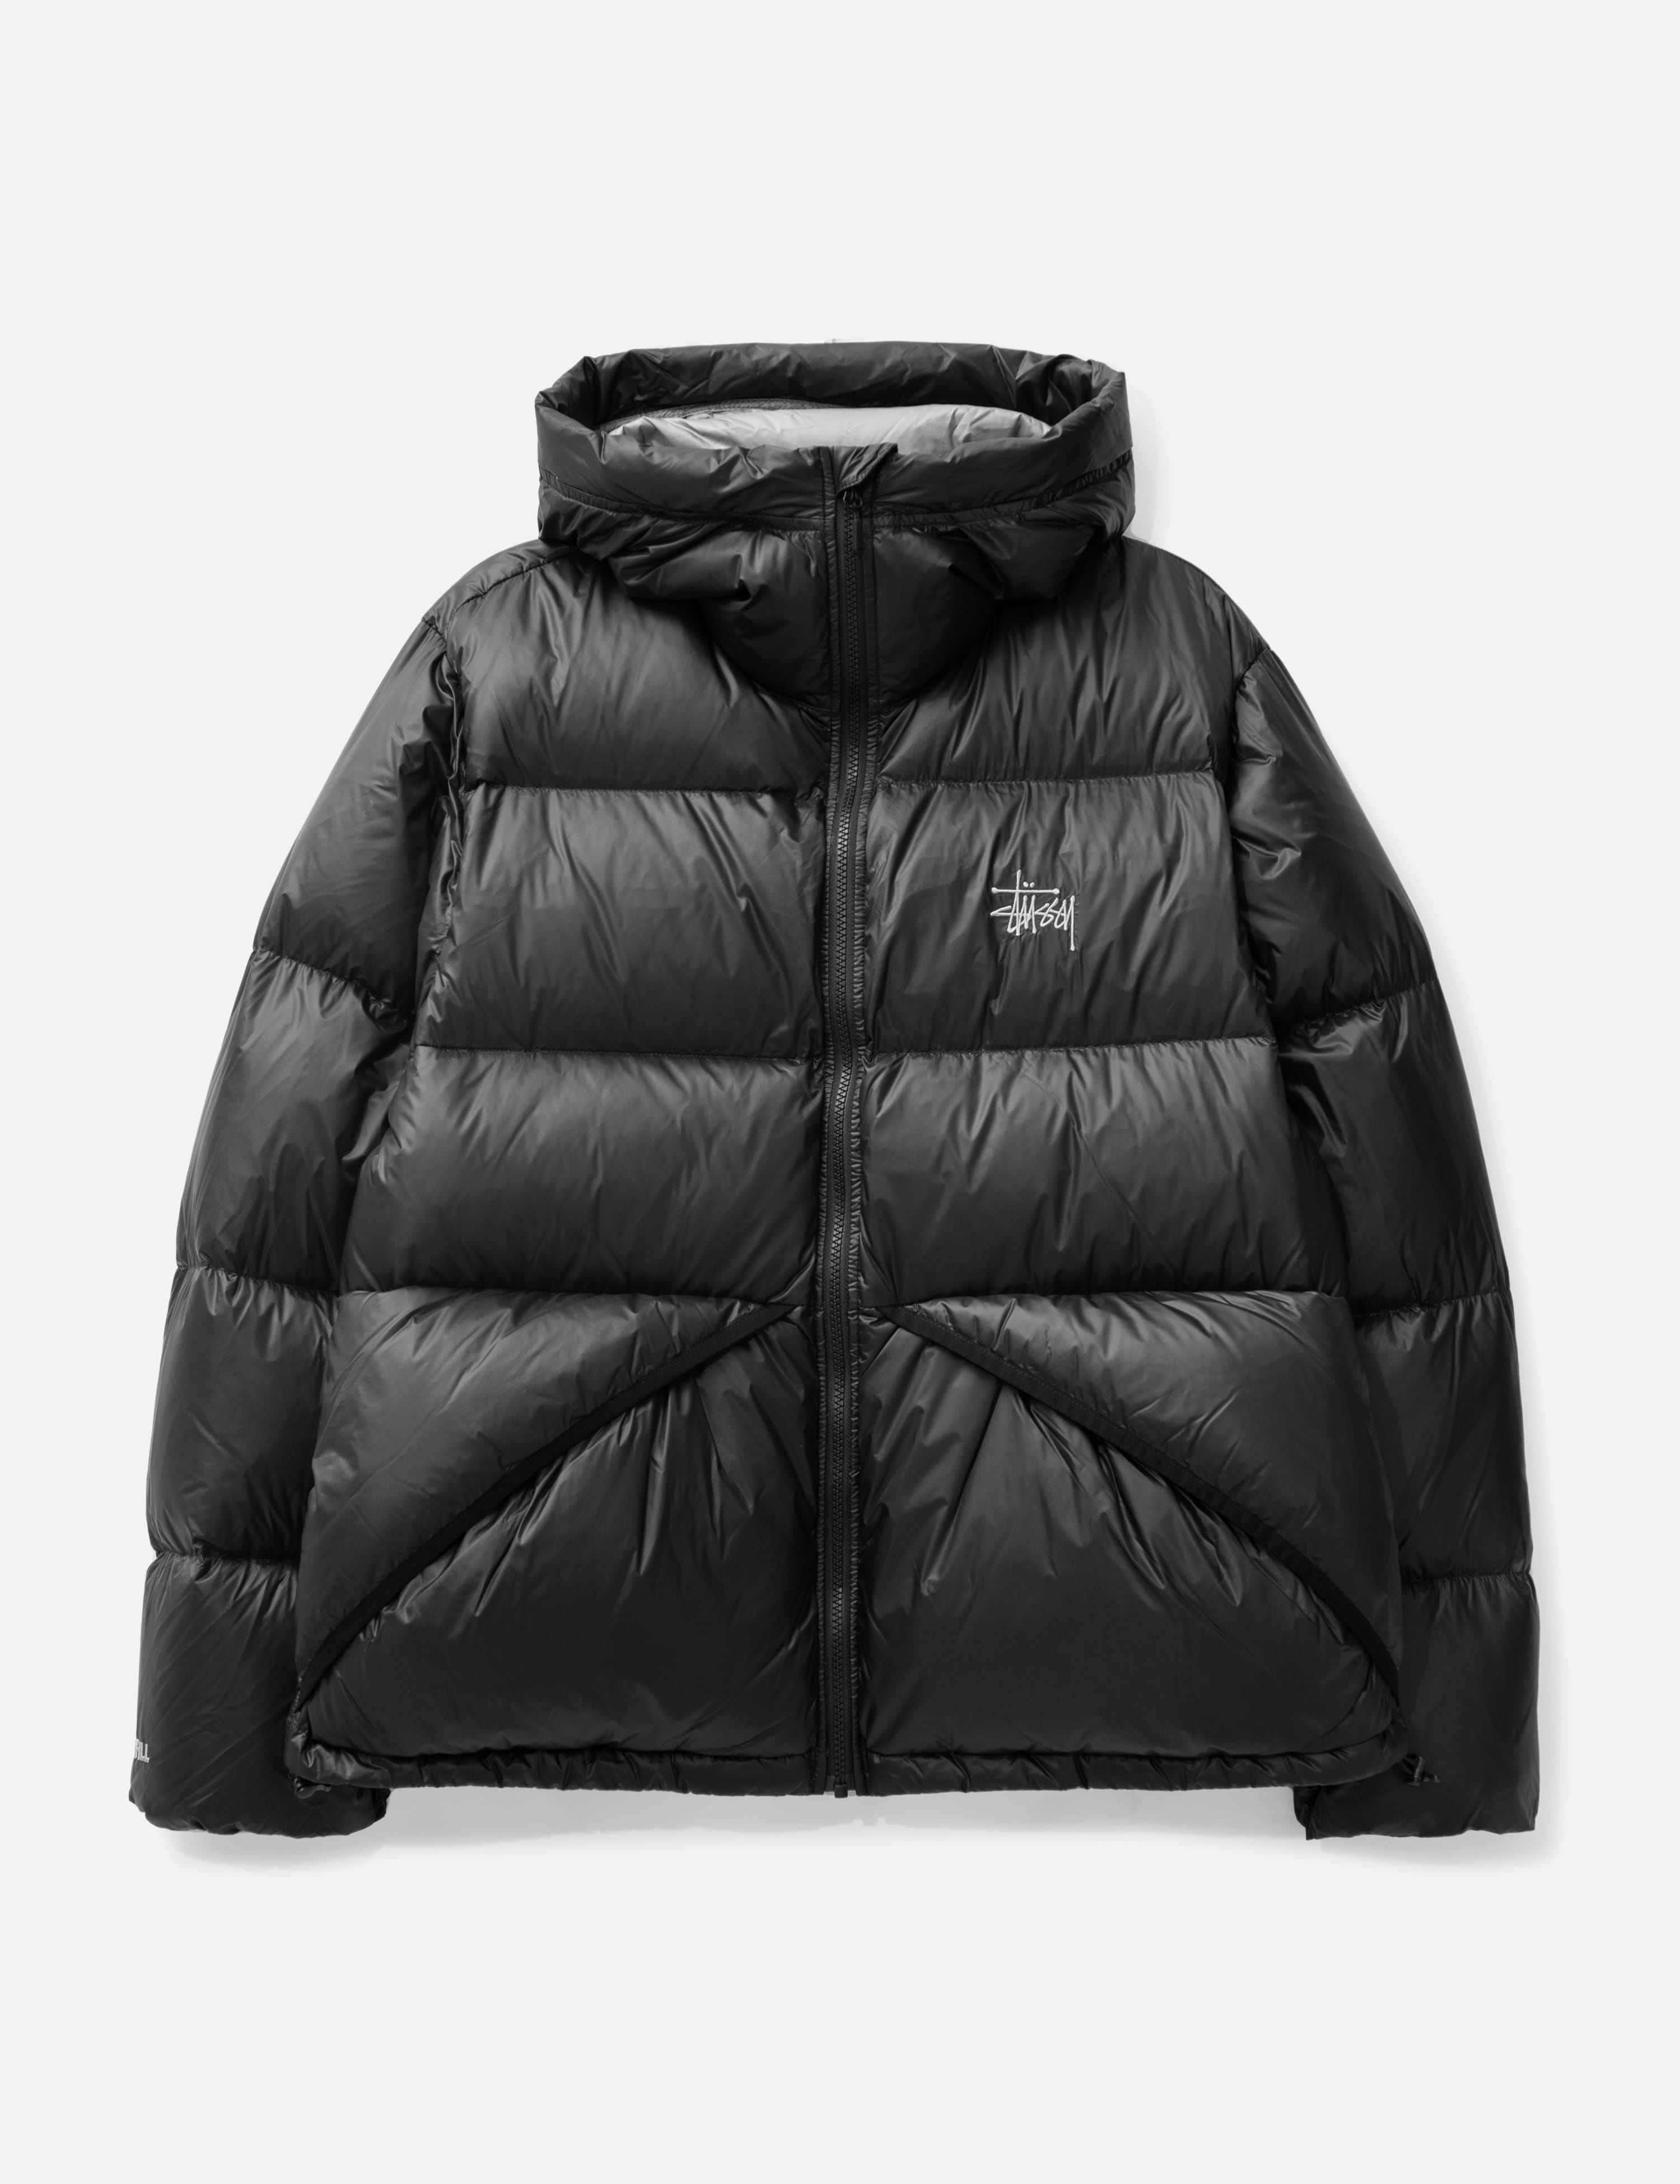 Stüssy - Micro Ripstop Down Parka | HBX - Globally Curated